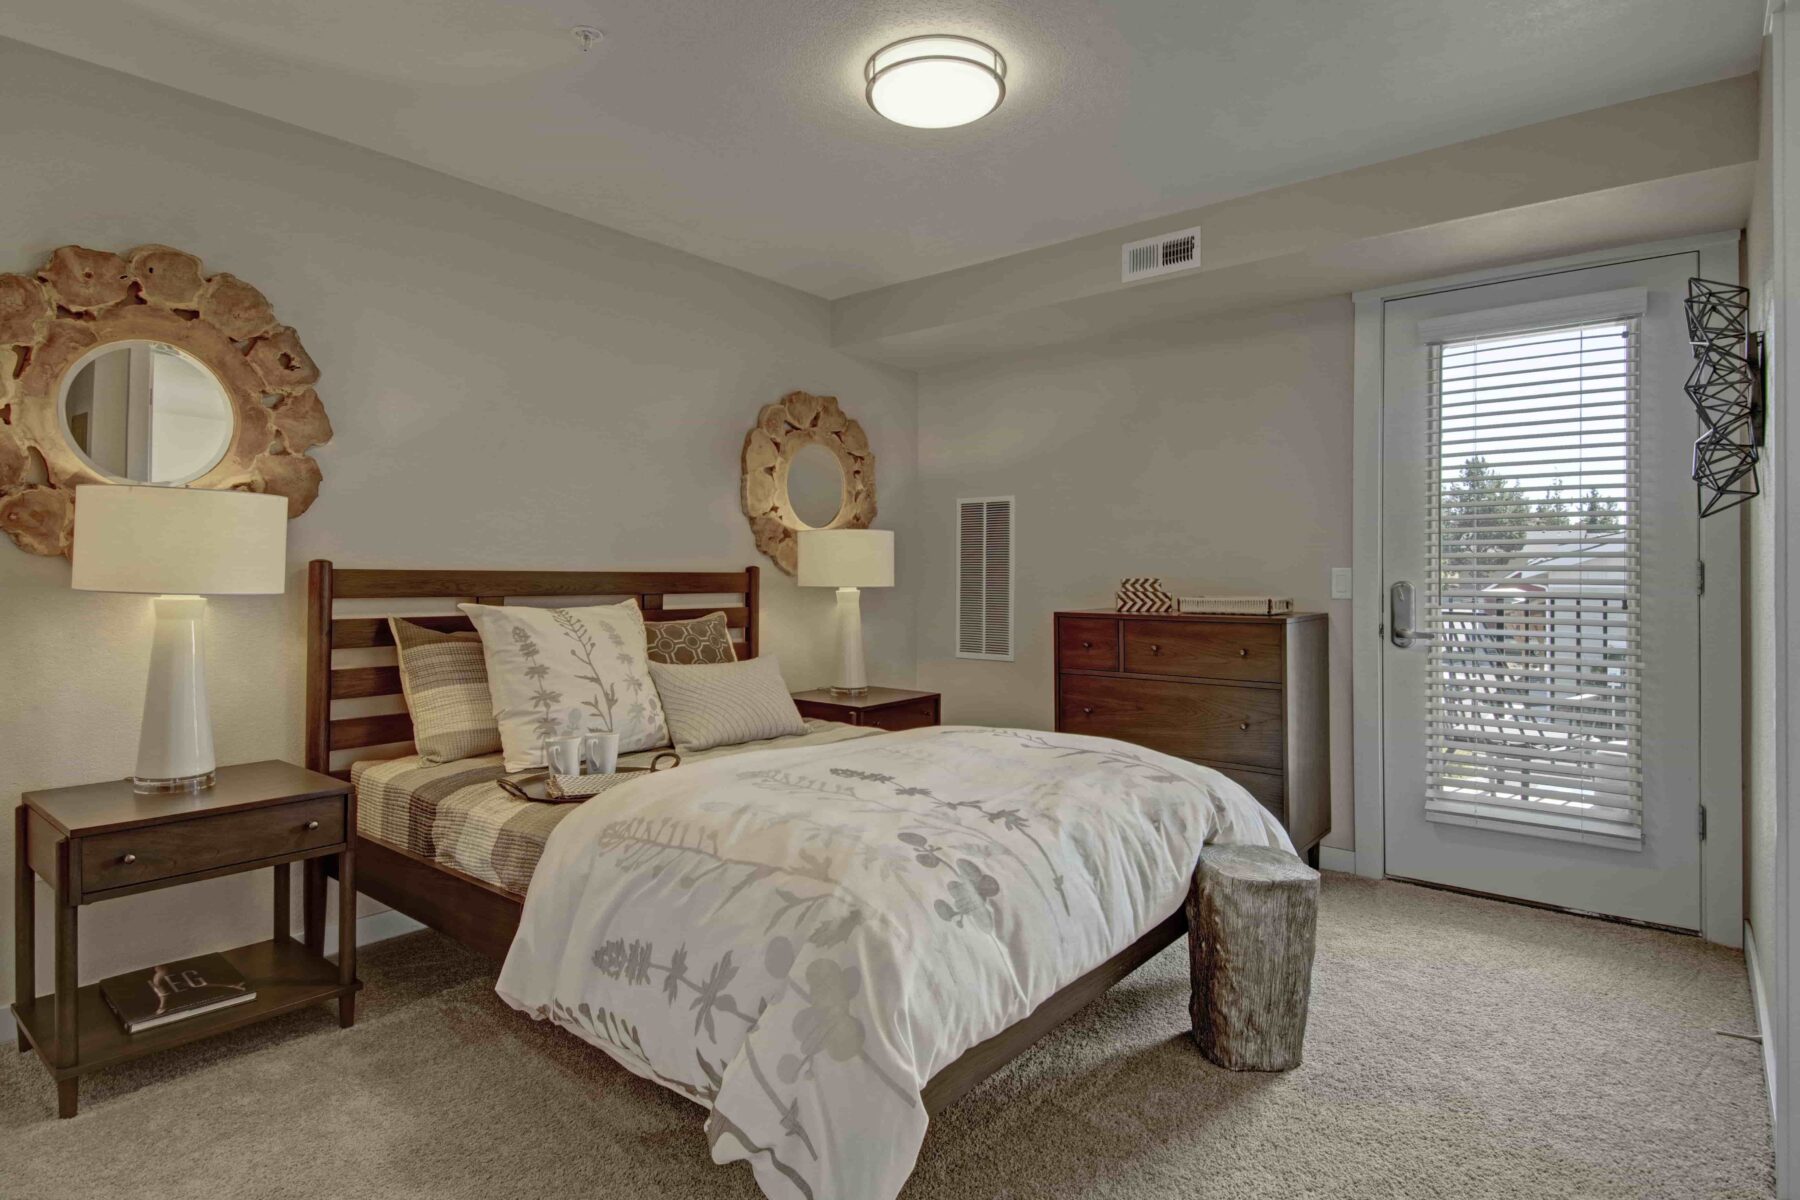 Bedroom with queen size bed, wooden bedside table, white lamp, round mirror, and white/gray furry rug.